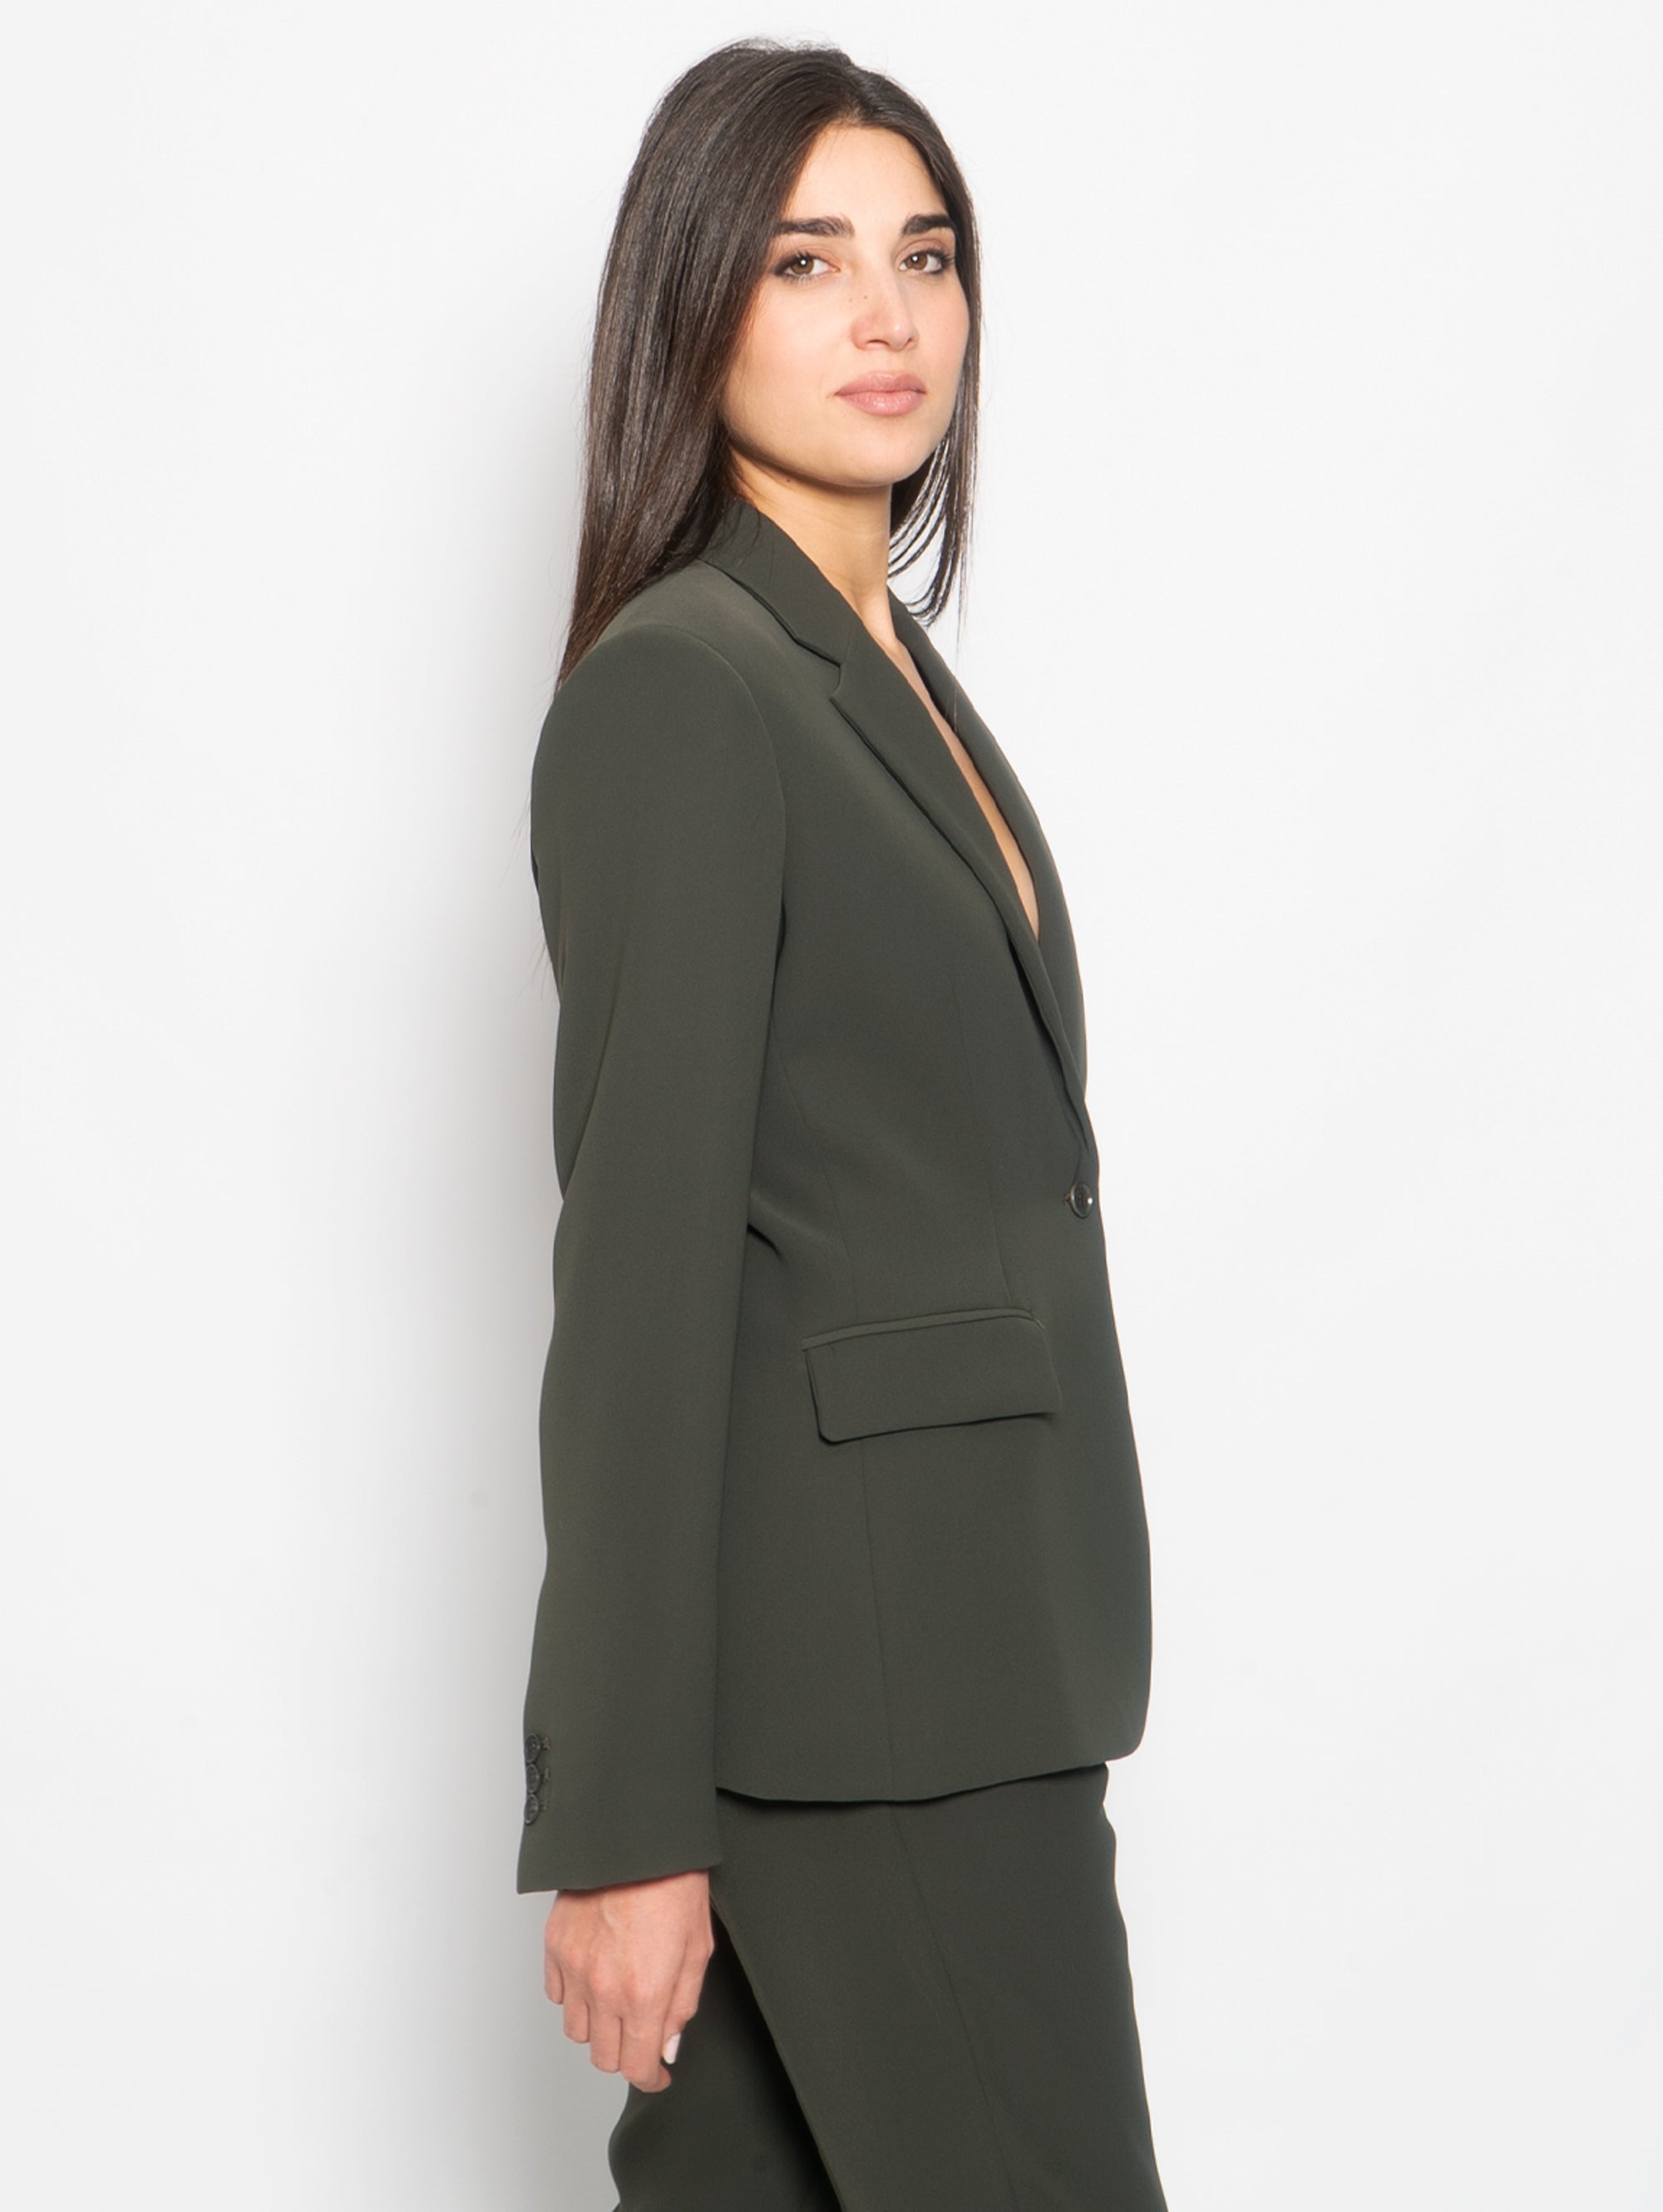 Single-breasted jacket in olive green cady